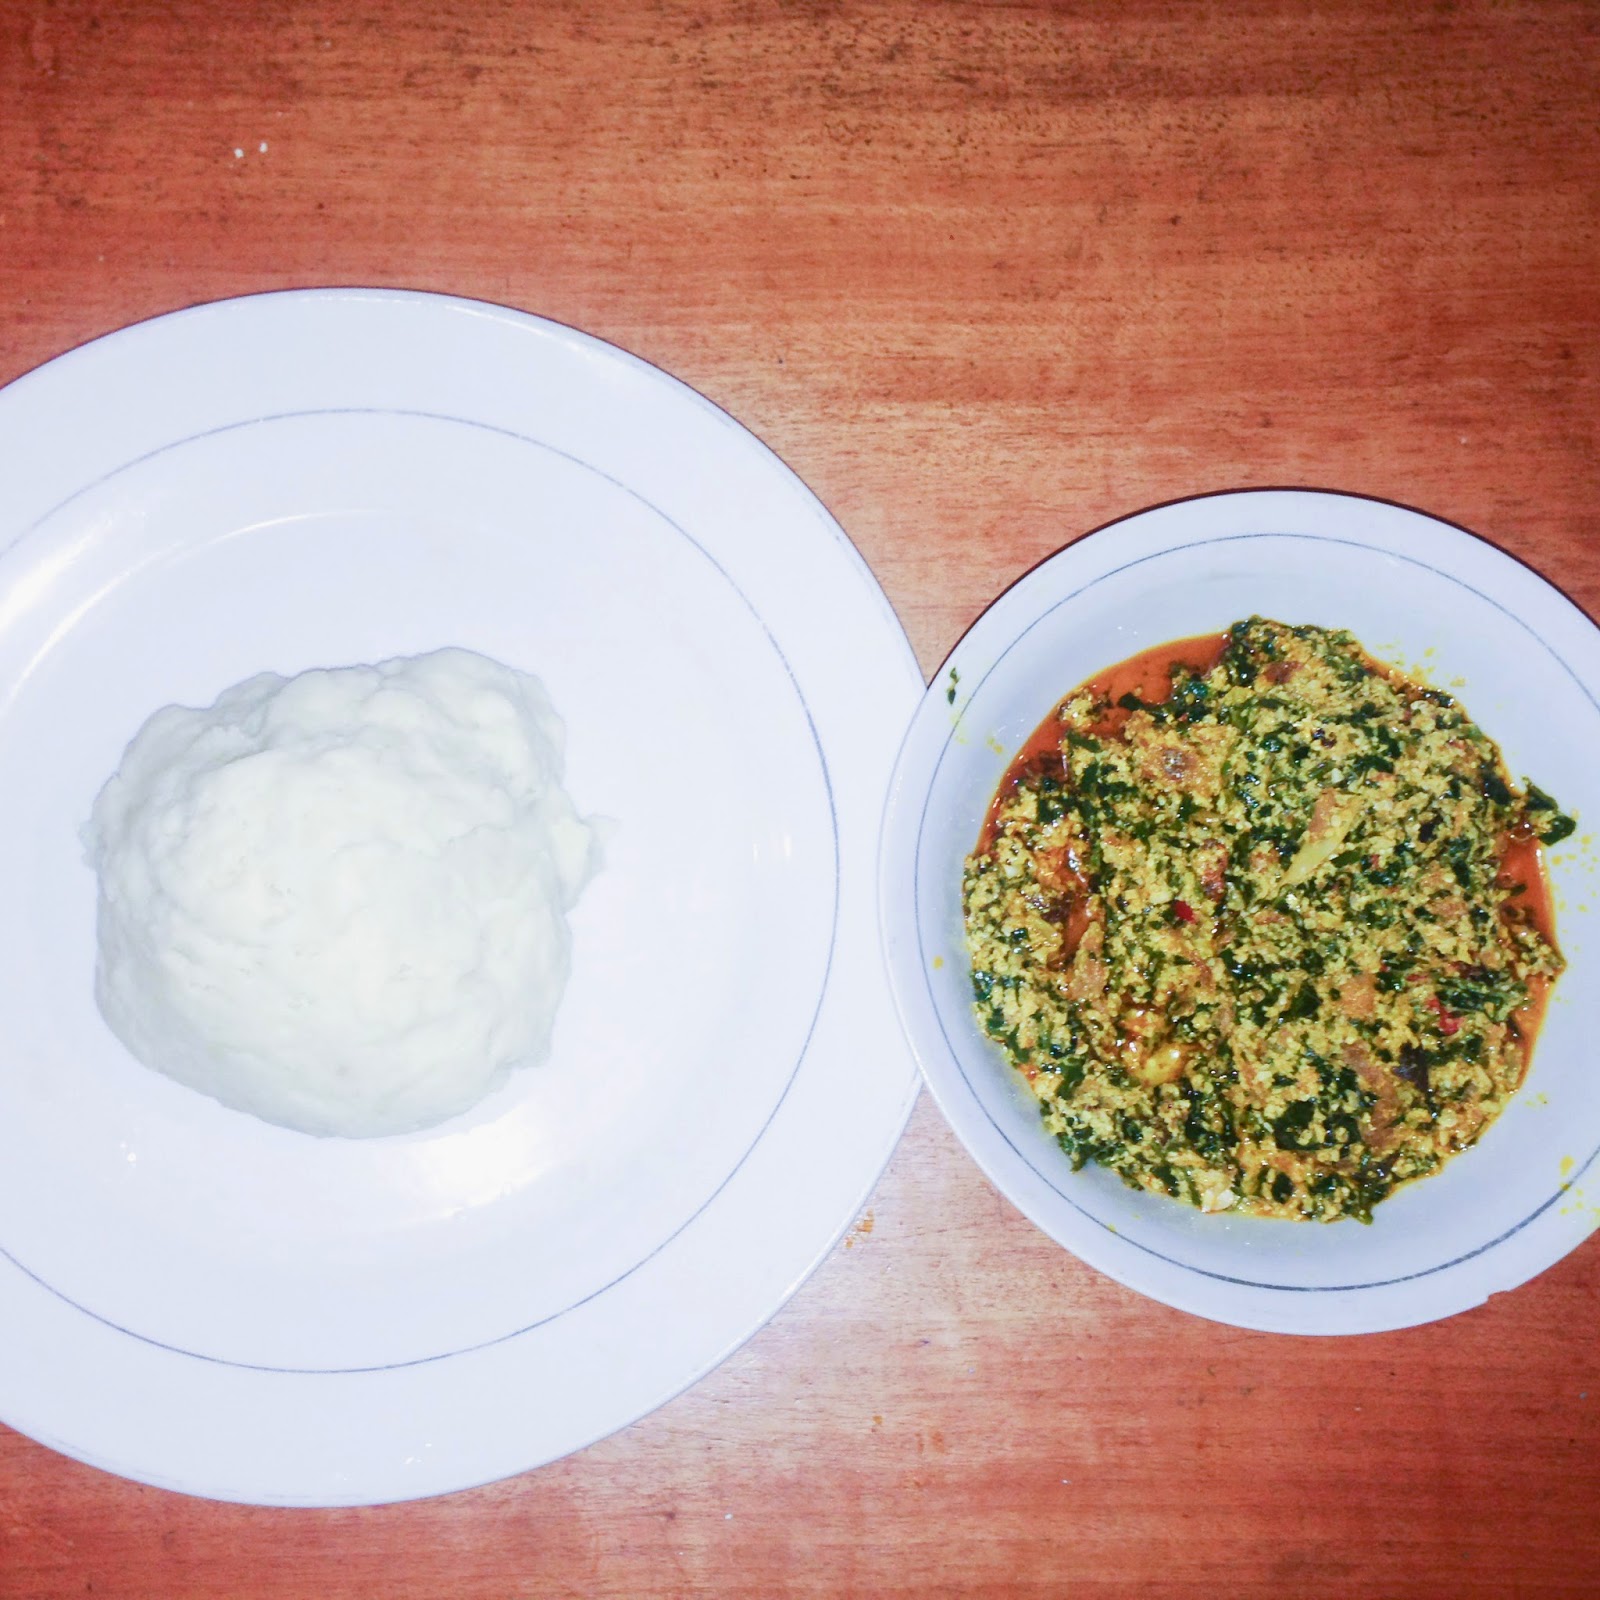 WHY I COOK(AFRICAN DELICACY)